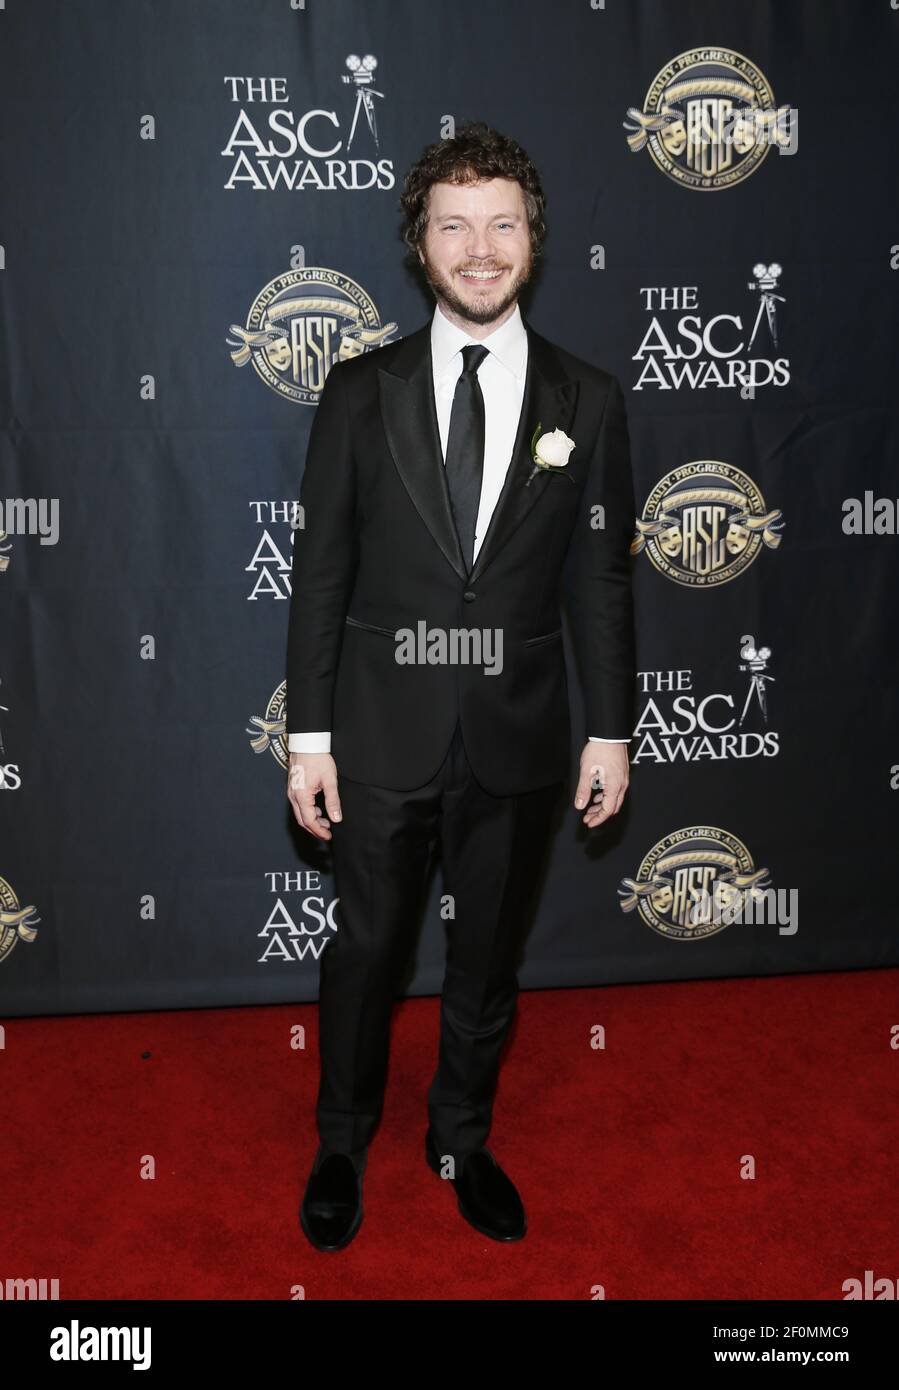 Nominee British cinematographer Ben Richardson poses at the 33rd annual ASC Awards and The American Society of Cinematographers 100th Anniversary Celebration at the Ray Dolby Ballroom at Hollywood & Highland, Saturday, February 9, 2019 in Hollywood, California. (Photo by Danny Moloshok/imageSPACE / SIPA USA) Stock Photo